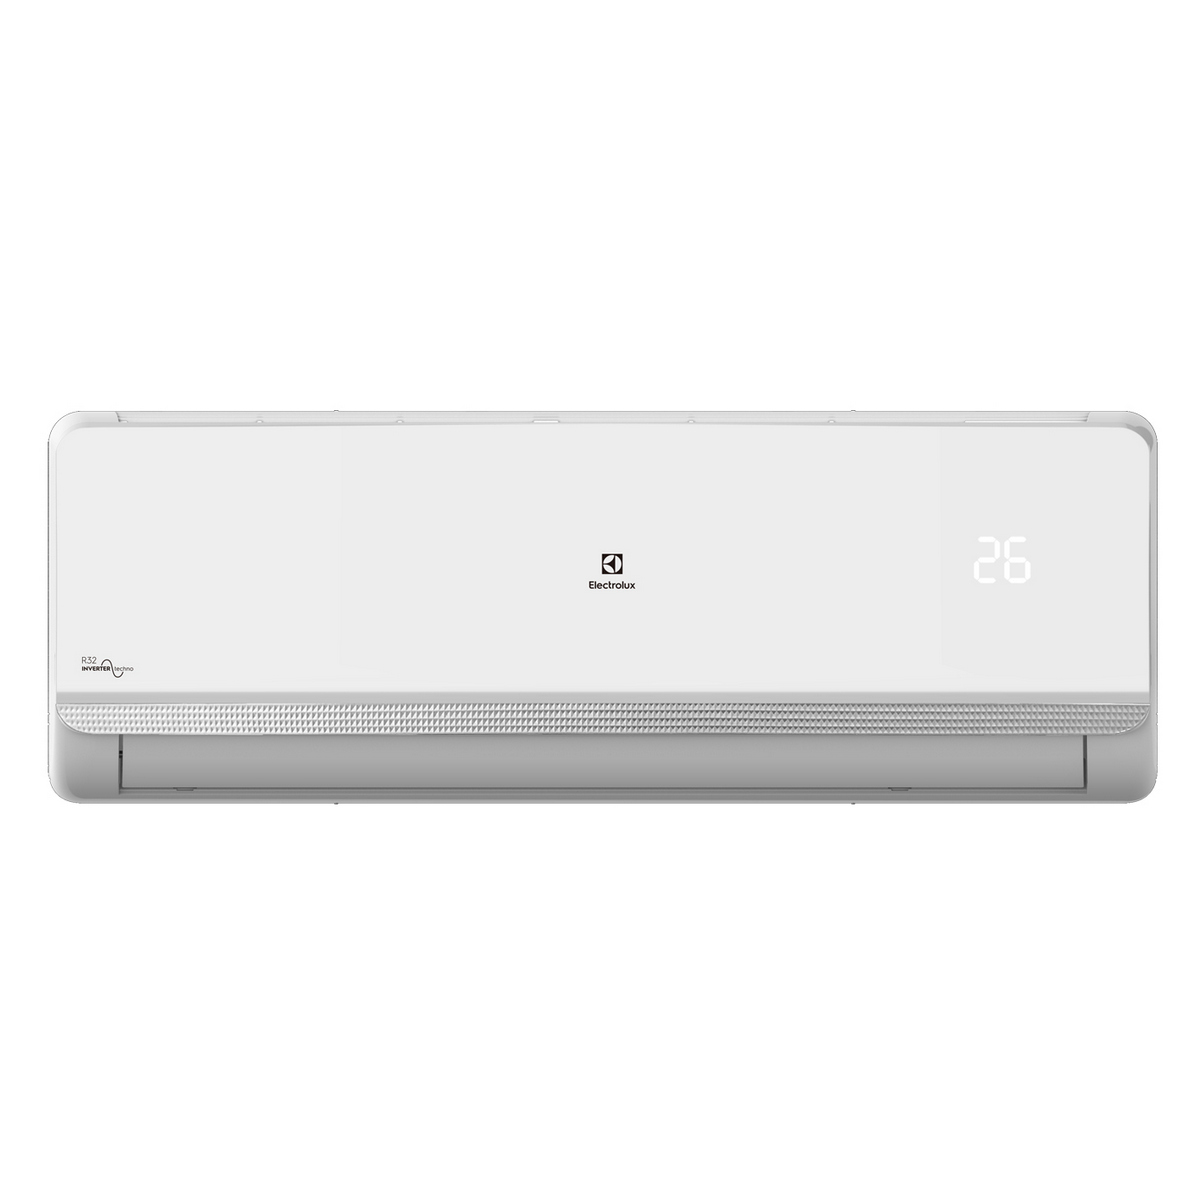 Electrolux Air Conditioning 